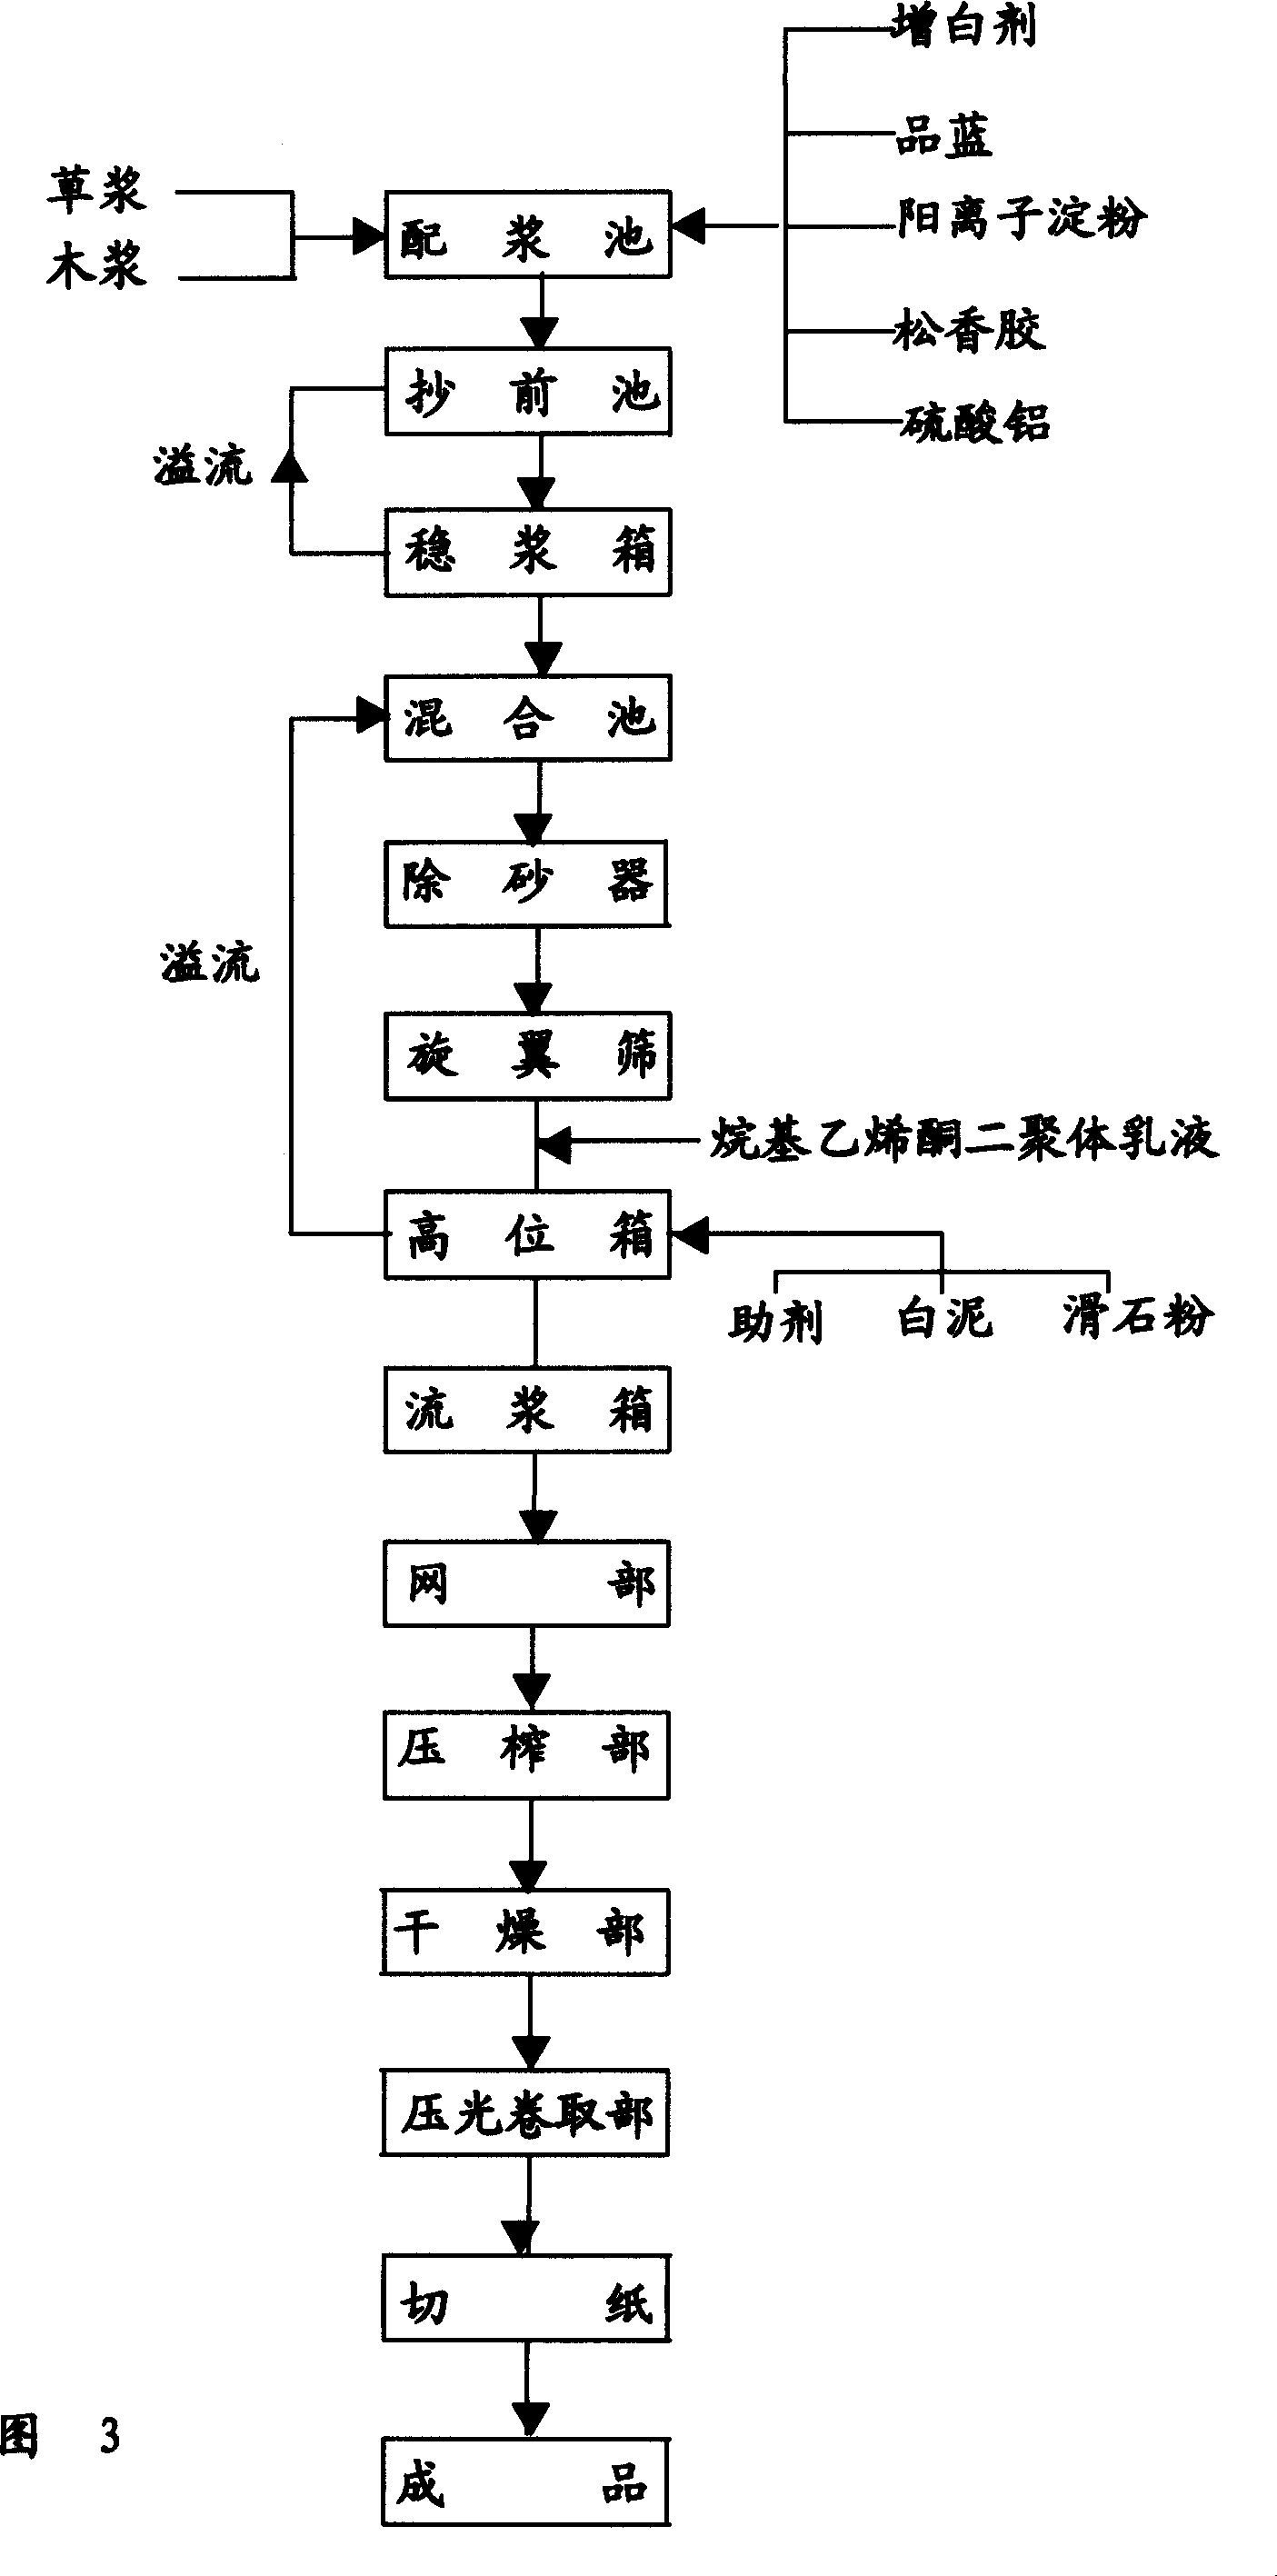 Improved lime mud recovering process and its application for producing neutral glue blending paper